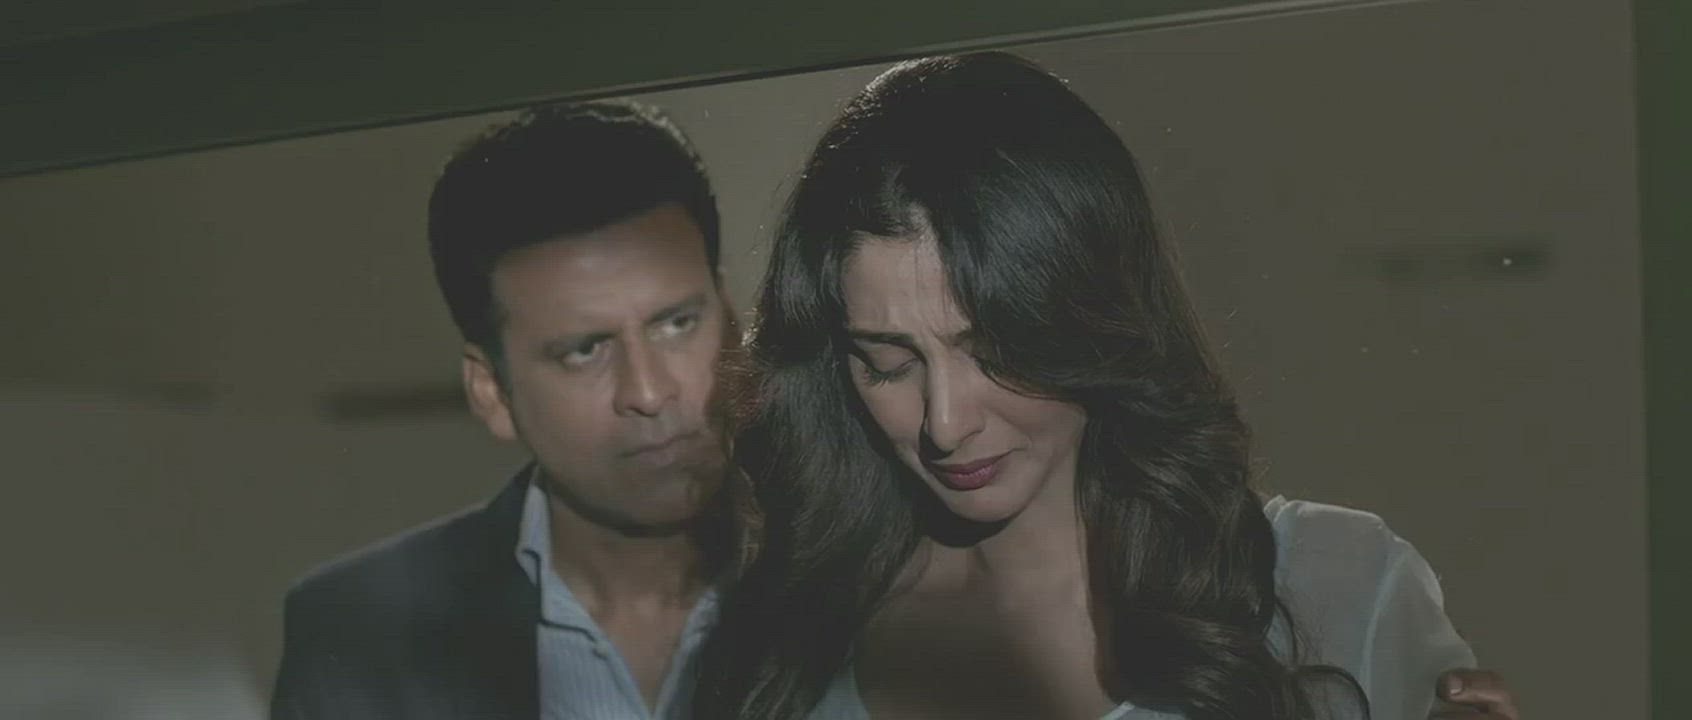 Tabu and Manoj Bajpayee Kiss and Hot Scene in Missing (2018)